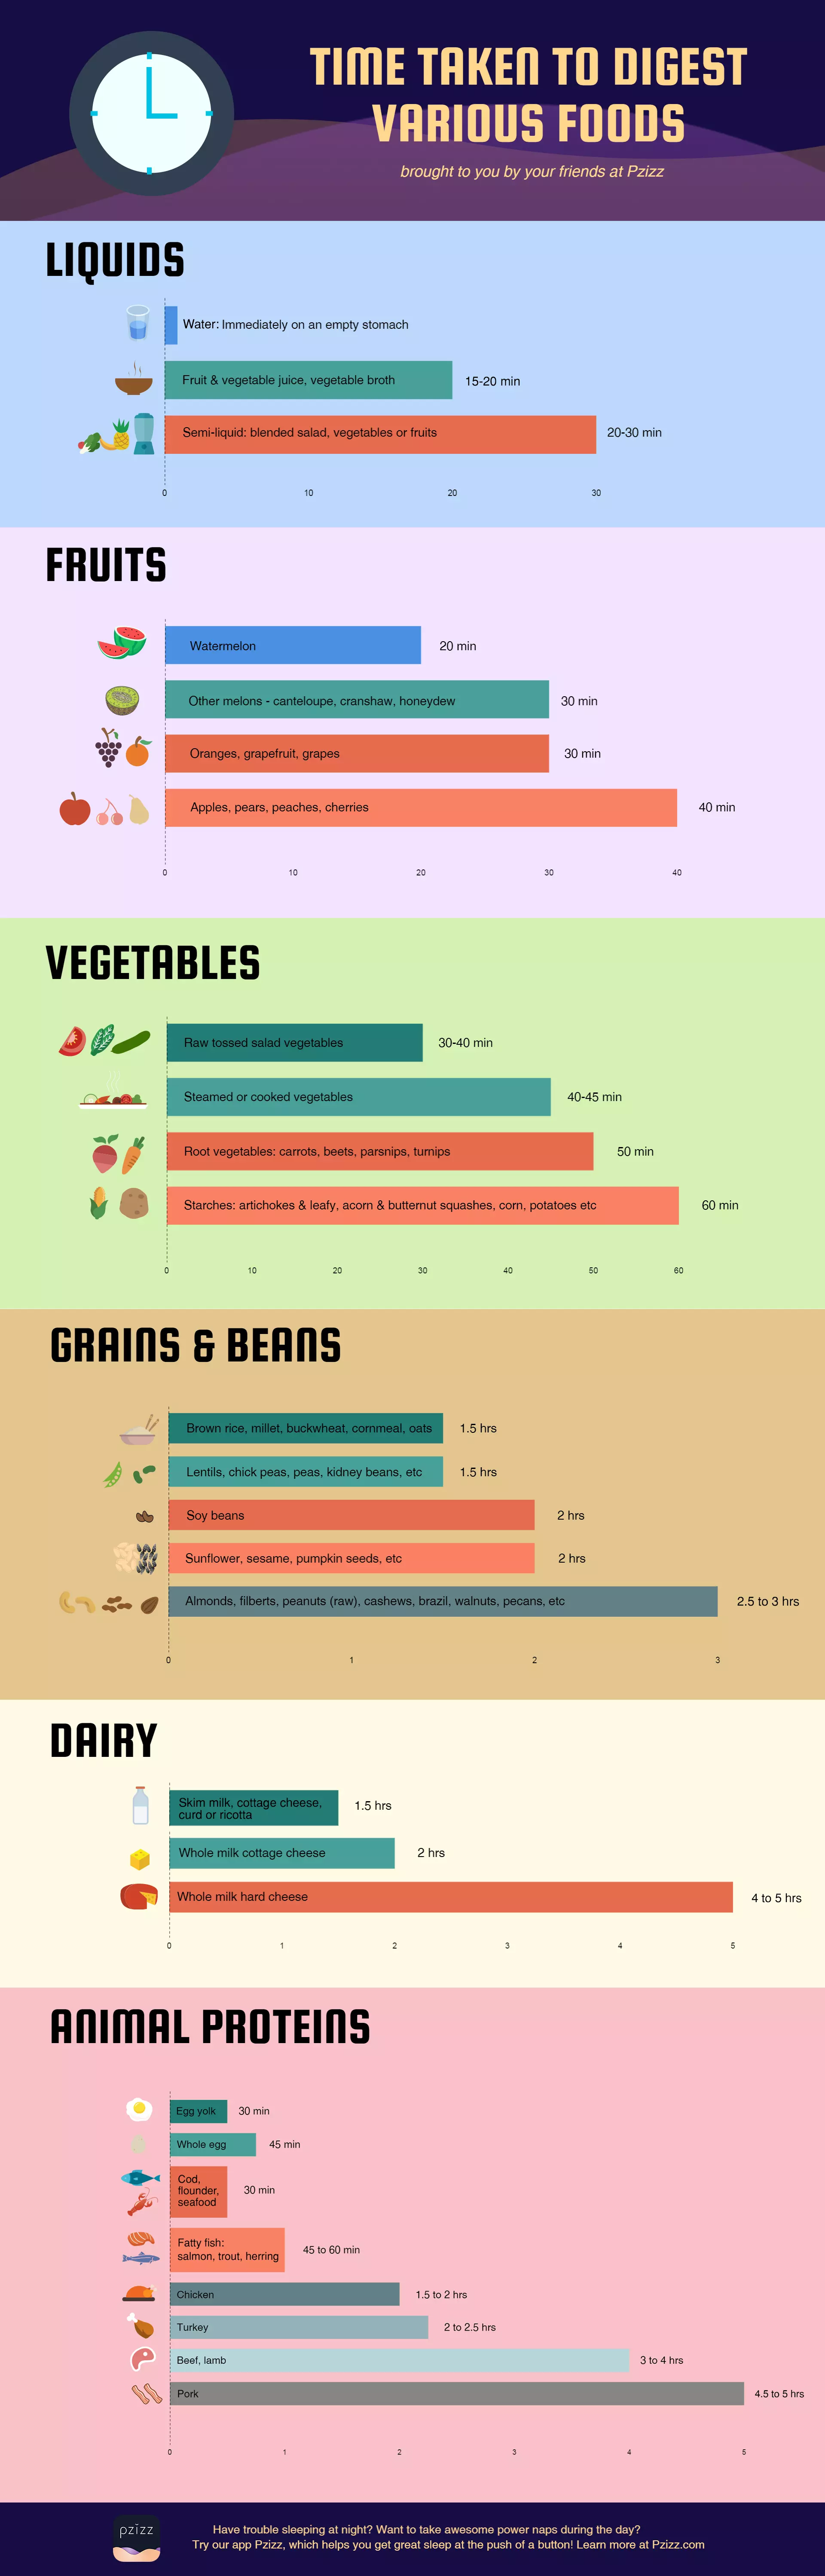 What takes longer to digest meat or vegetables?